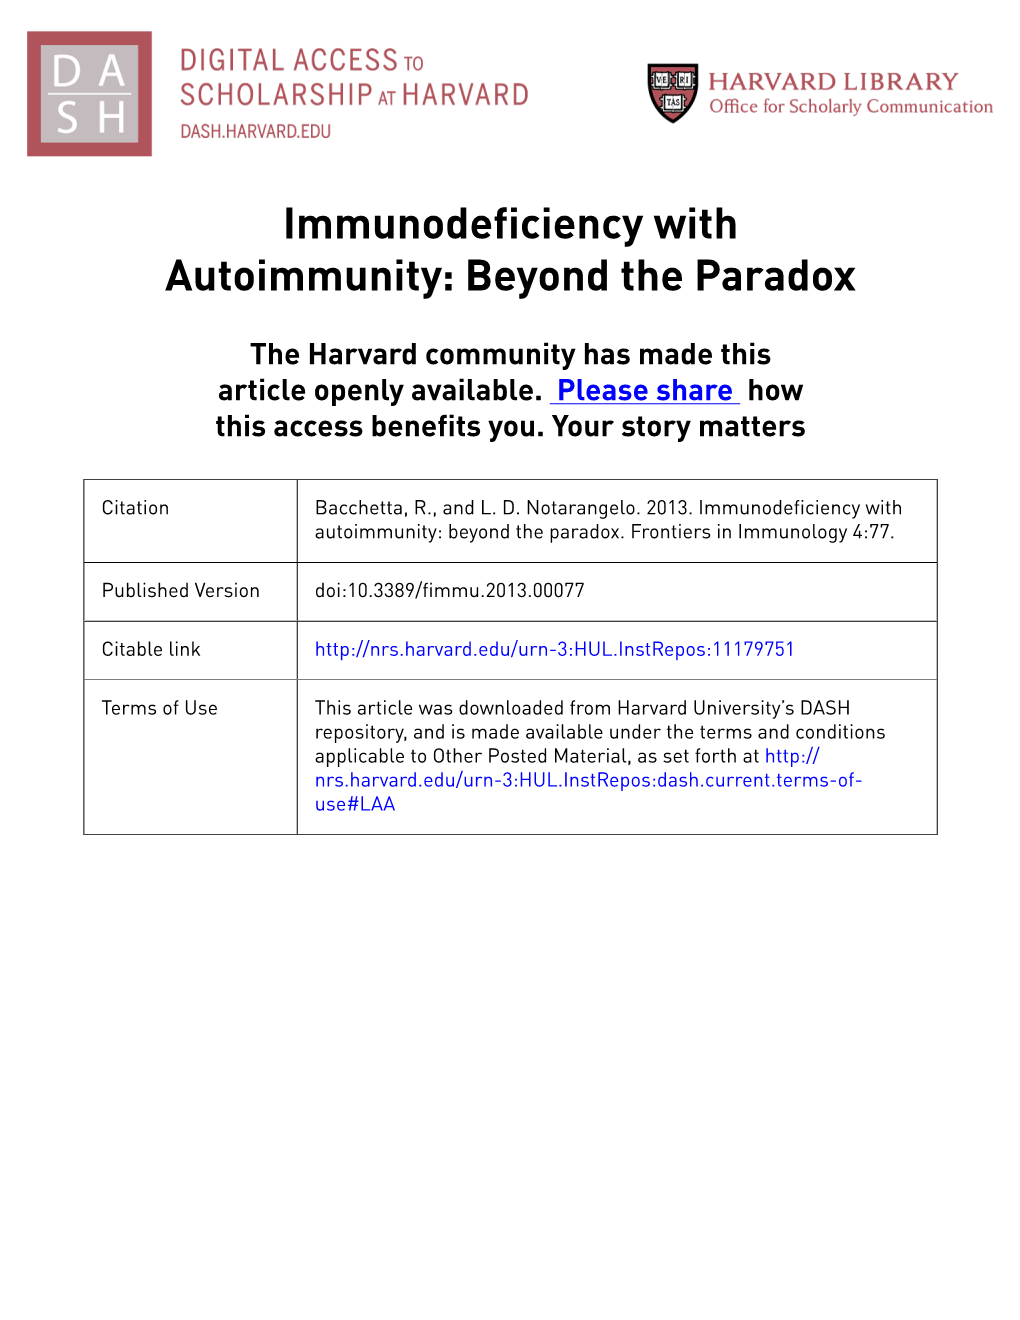 Immunodeficiency with Autoimmunity: Beyond the Paradox